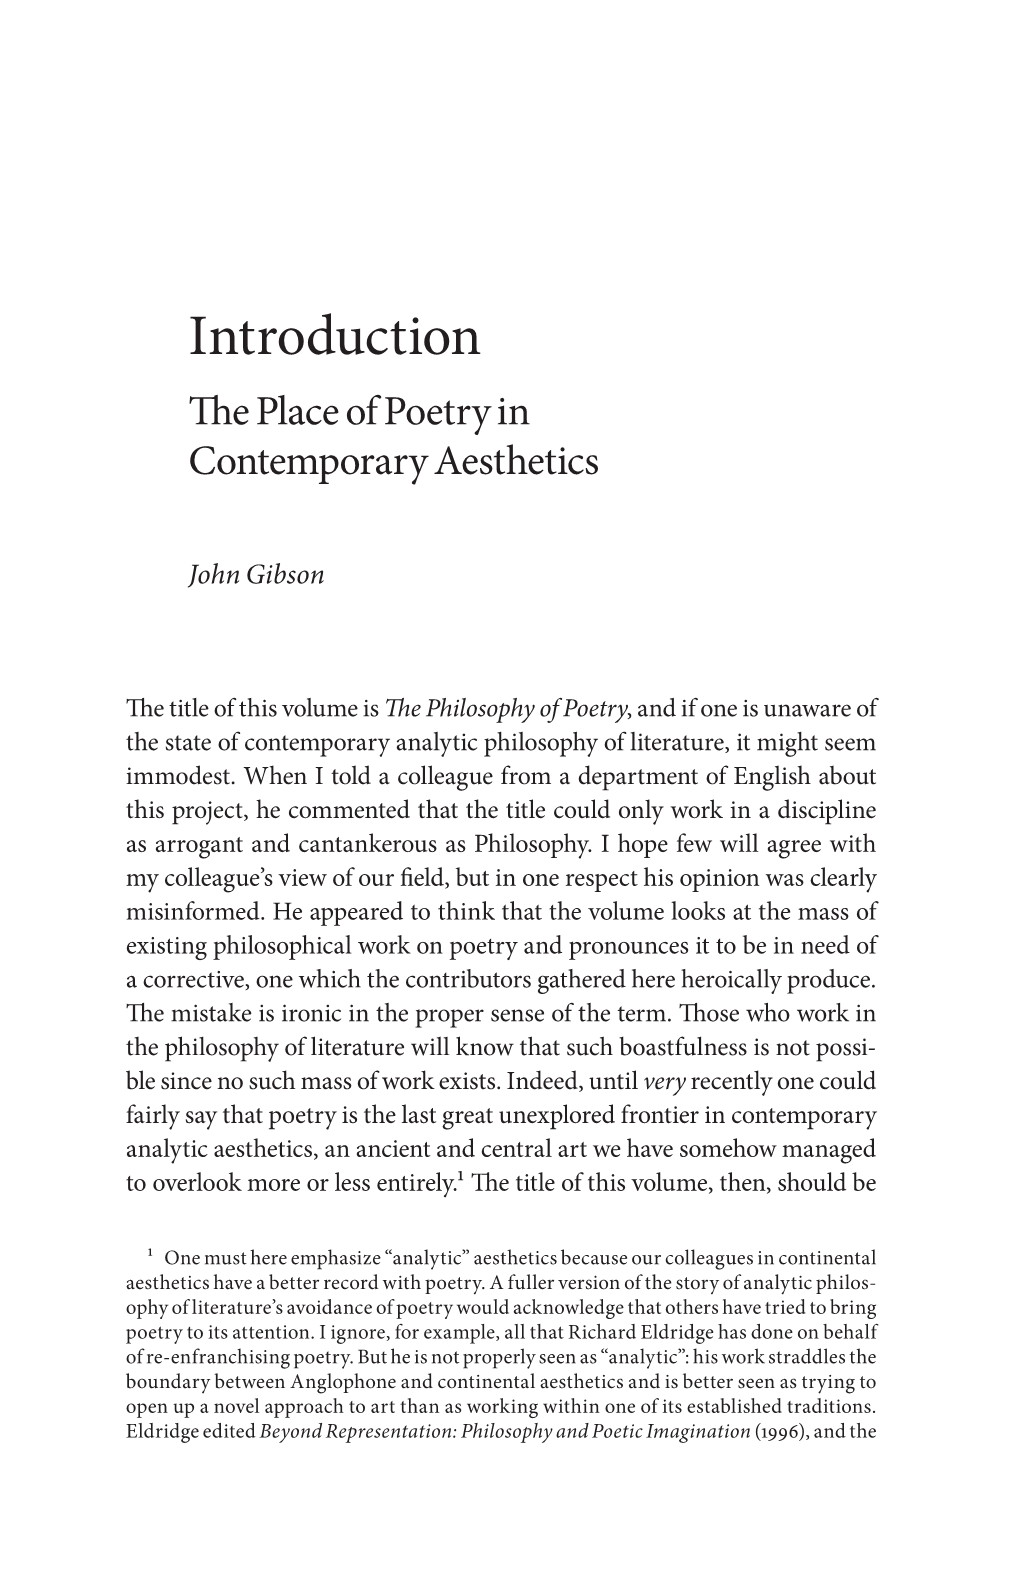 Introduction Te Place of Poetry in Contemporary Aesthetics